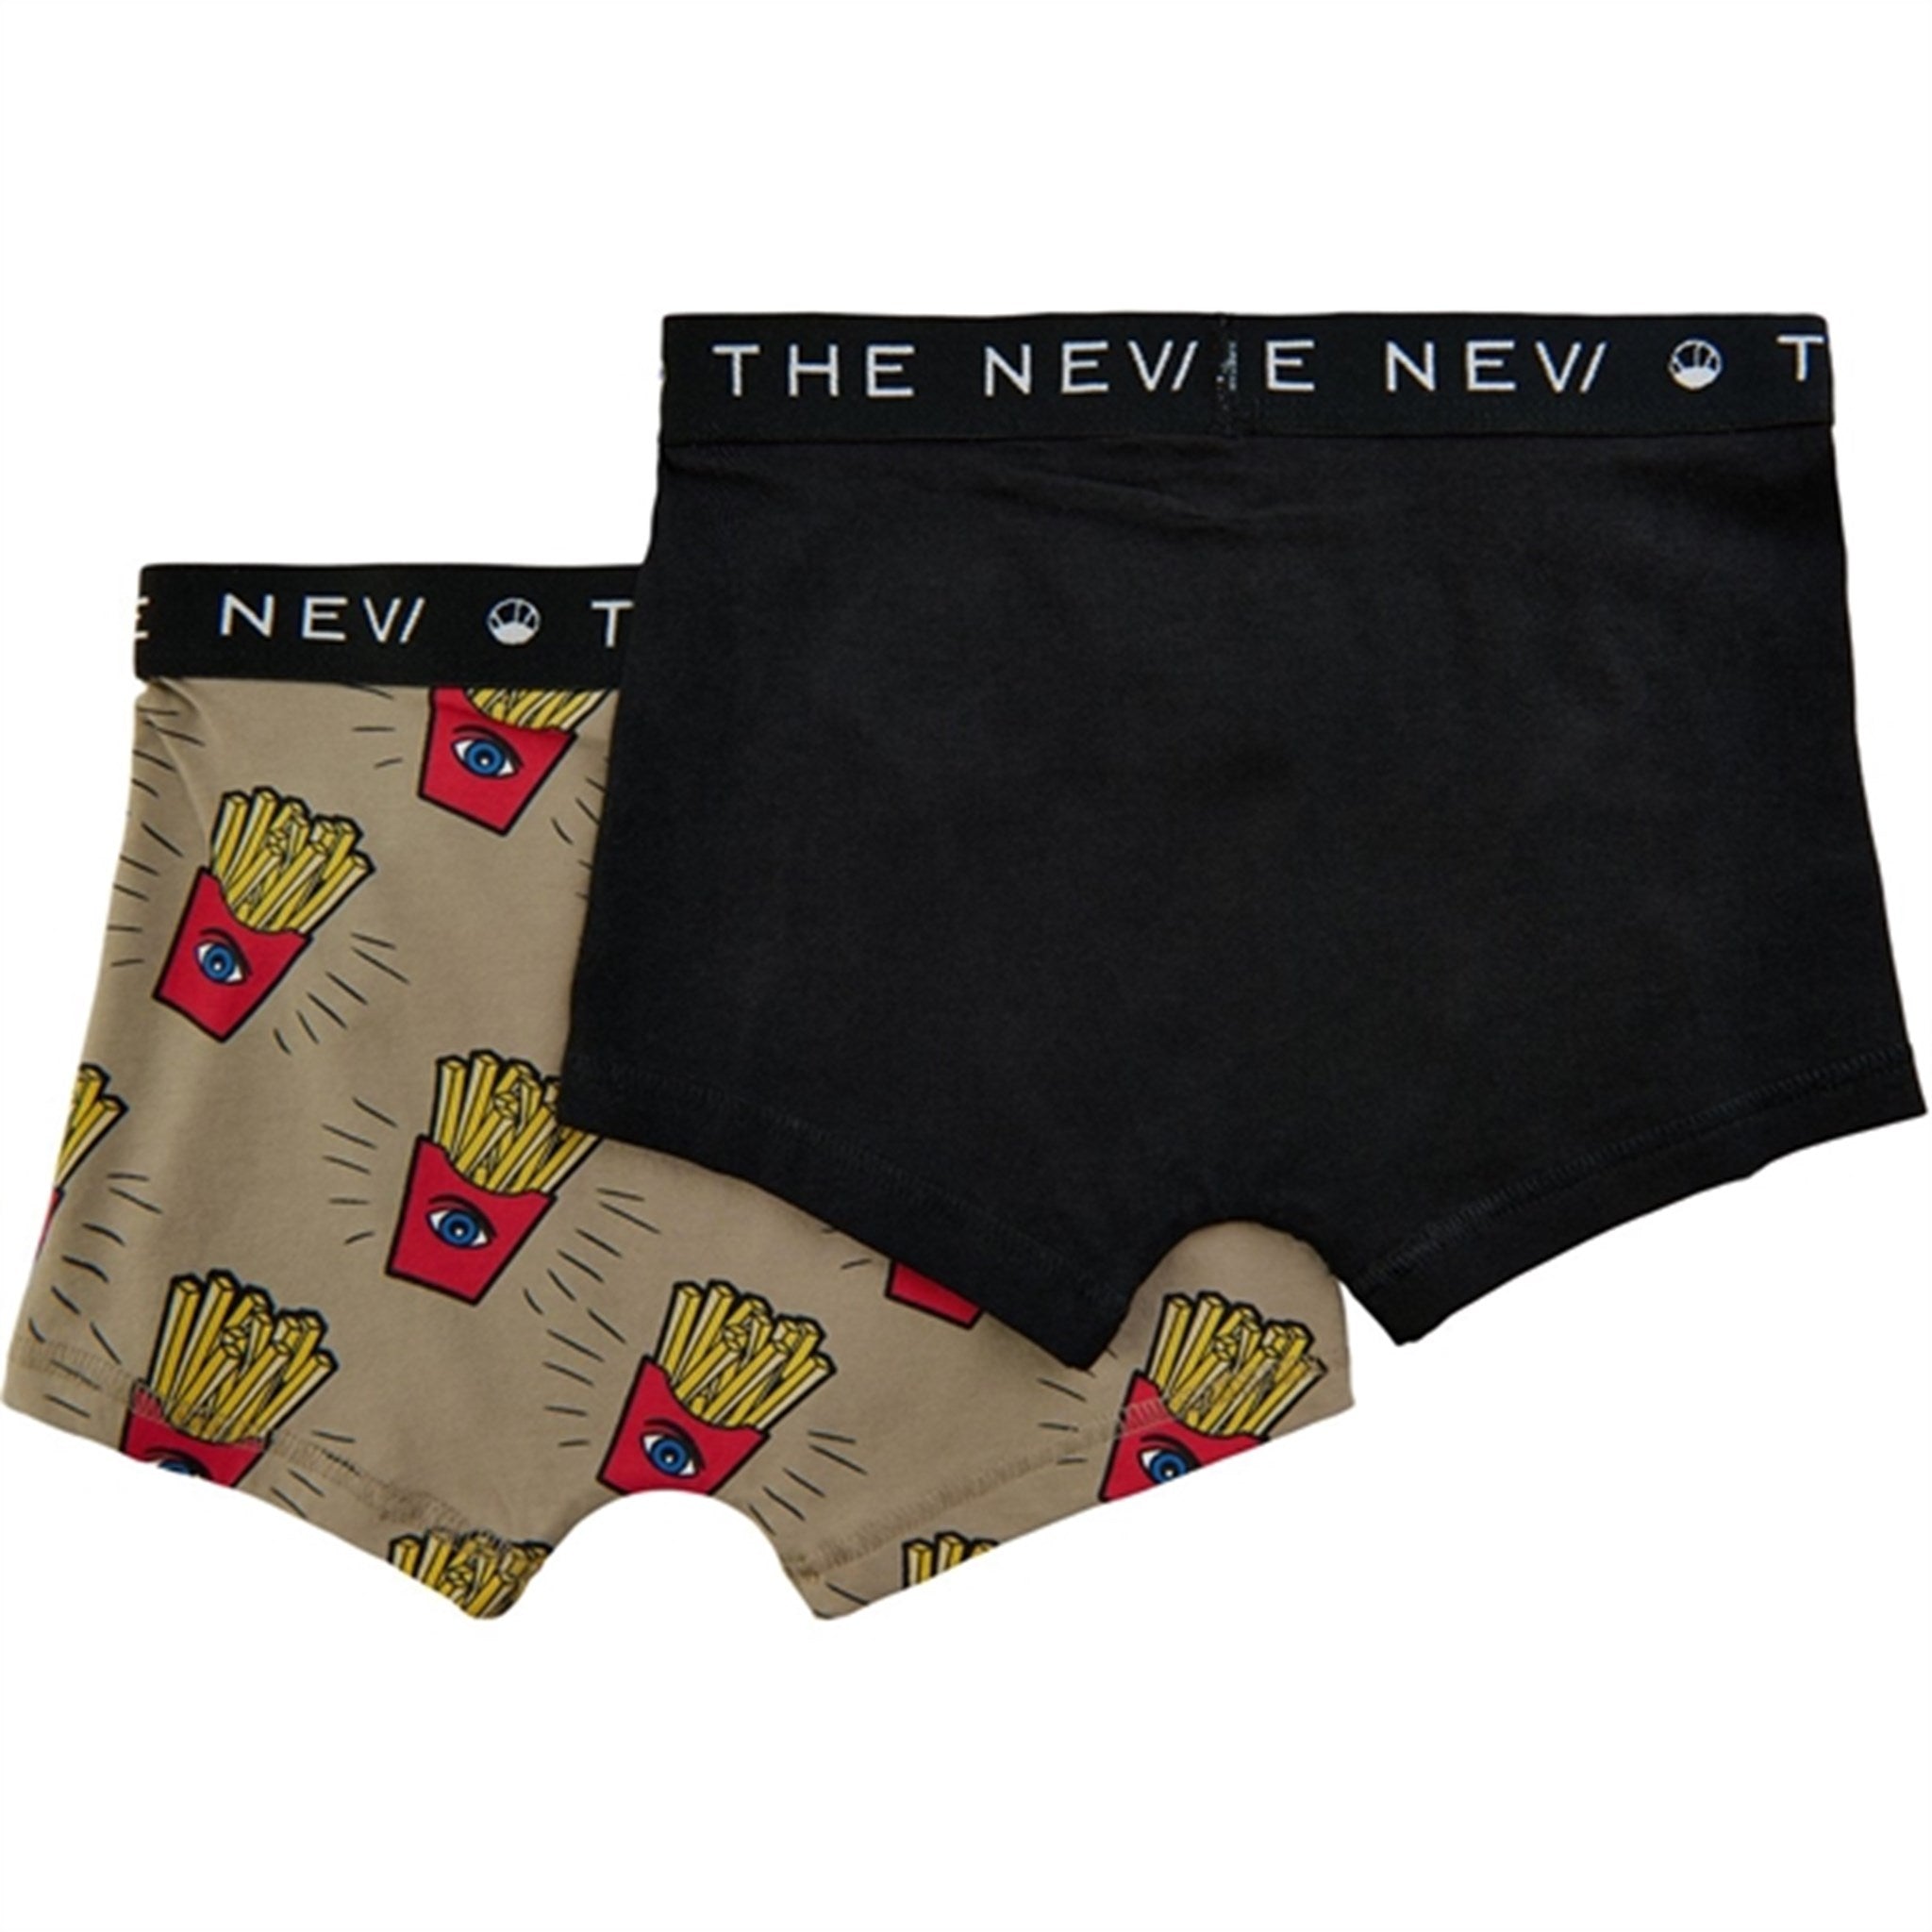 THE NEW Greige Boxers 2-pack 2